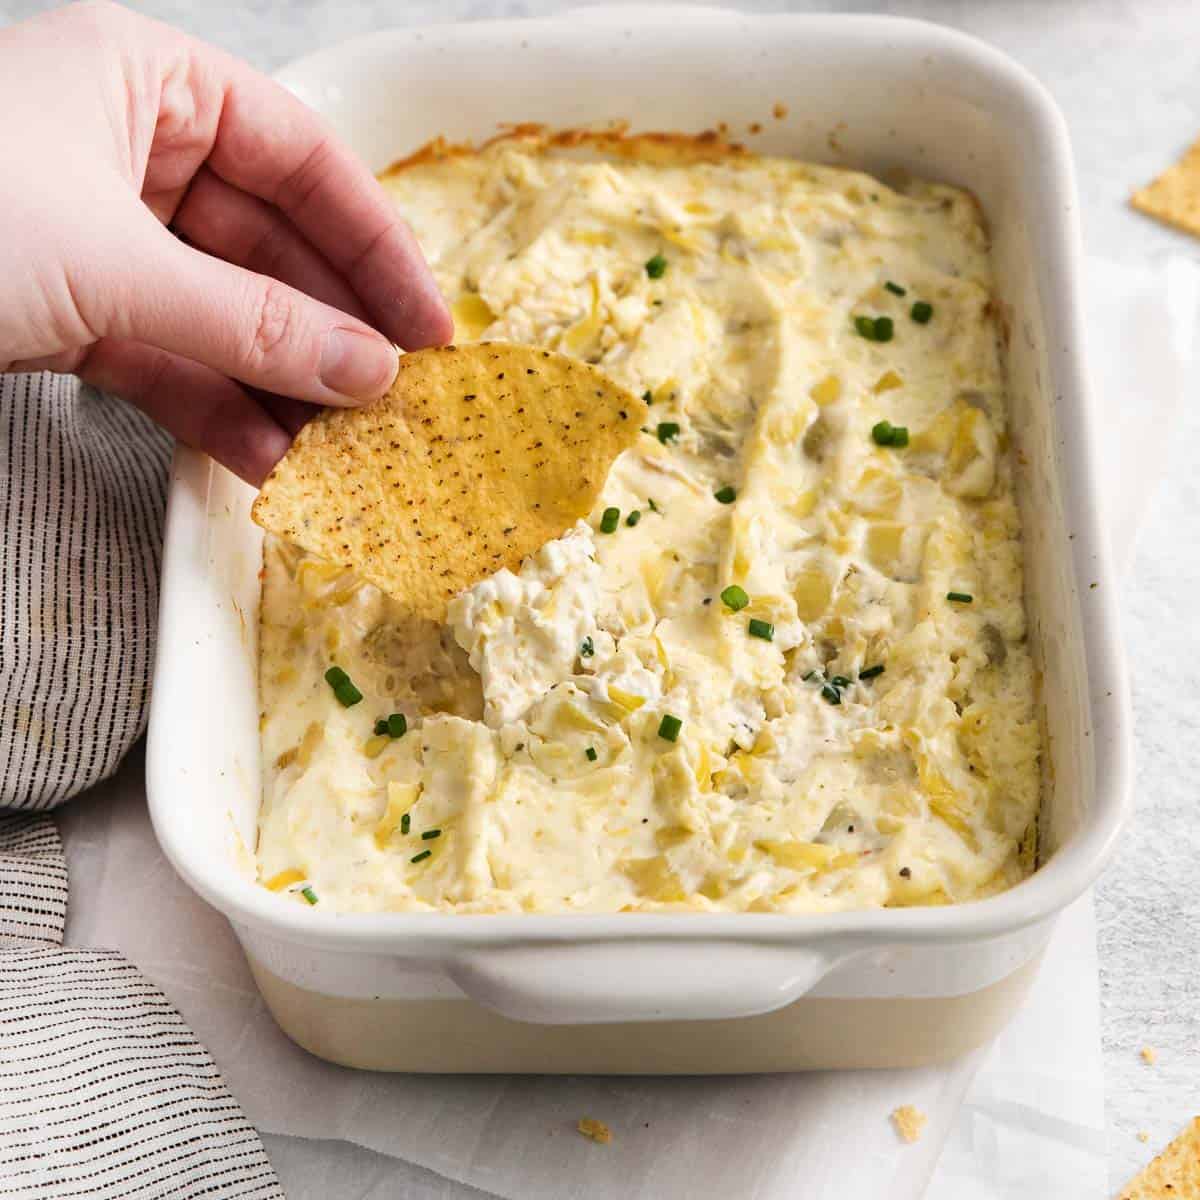 A hand dipping a chip into the dish of hot artichoke dip